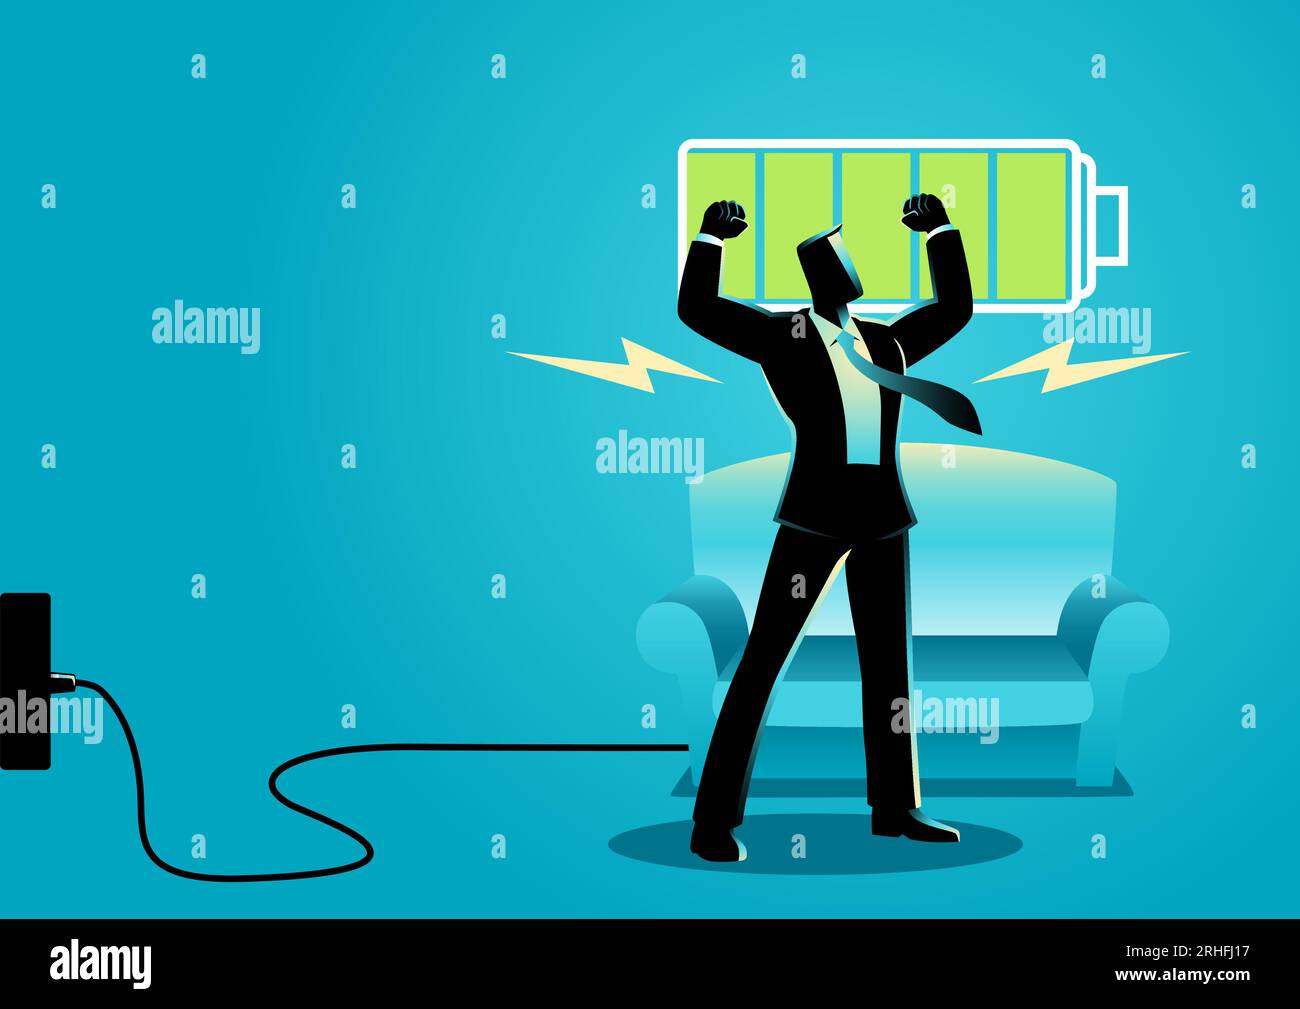 Business Concept Illustration Of A Businessman After Getting Restful Sleep And Waking Up